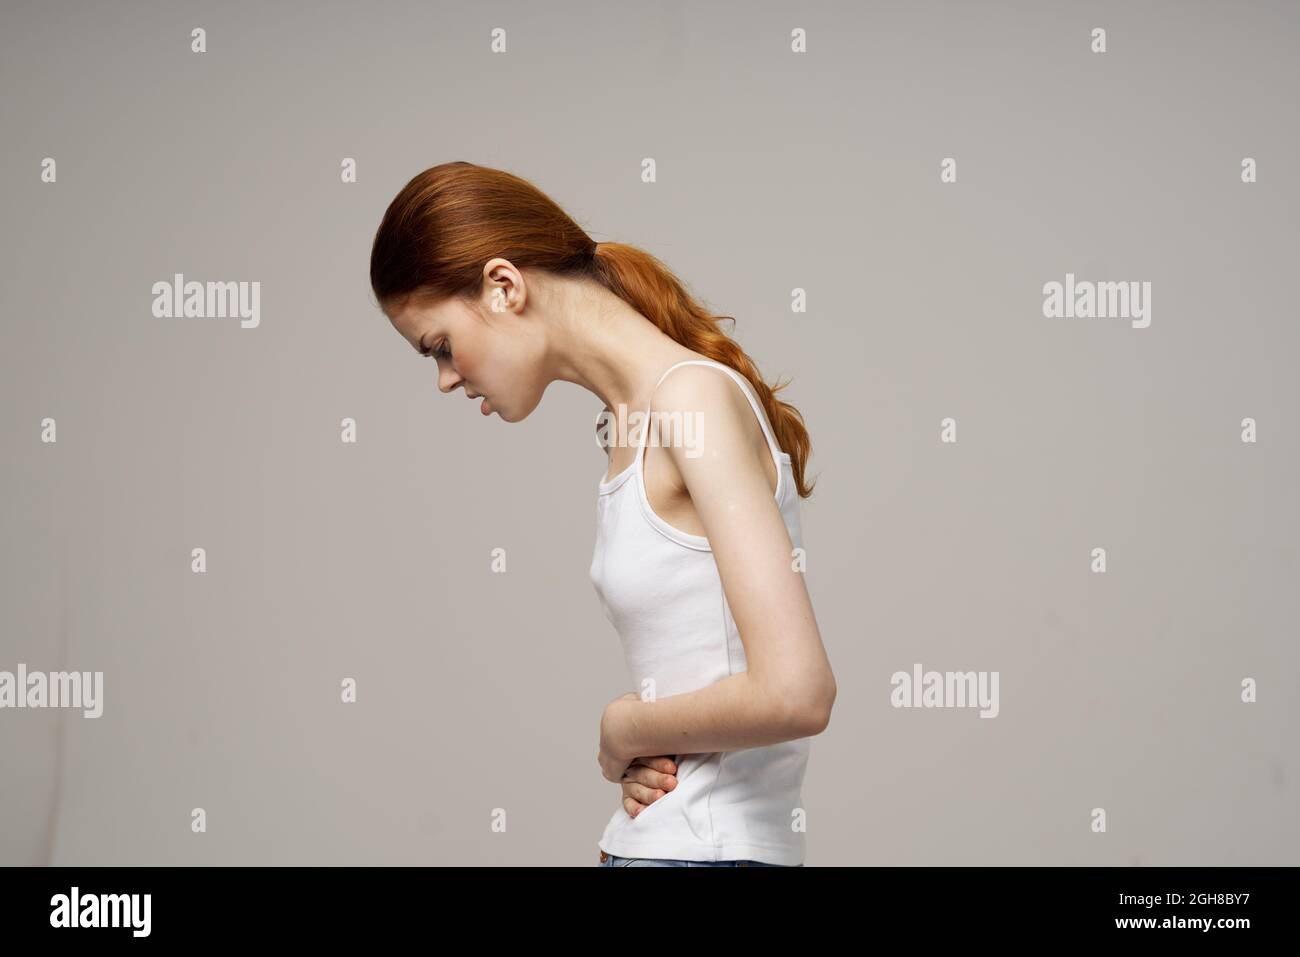 https://c8.alamy.com/comp/2GH8BY7/woman-groin-pain-intimate-illness-gynecology-discomfort-light-background-2GH8BY7.jpg